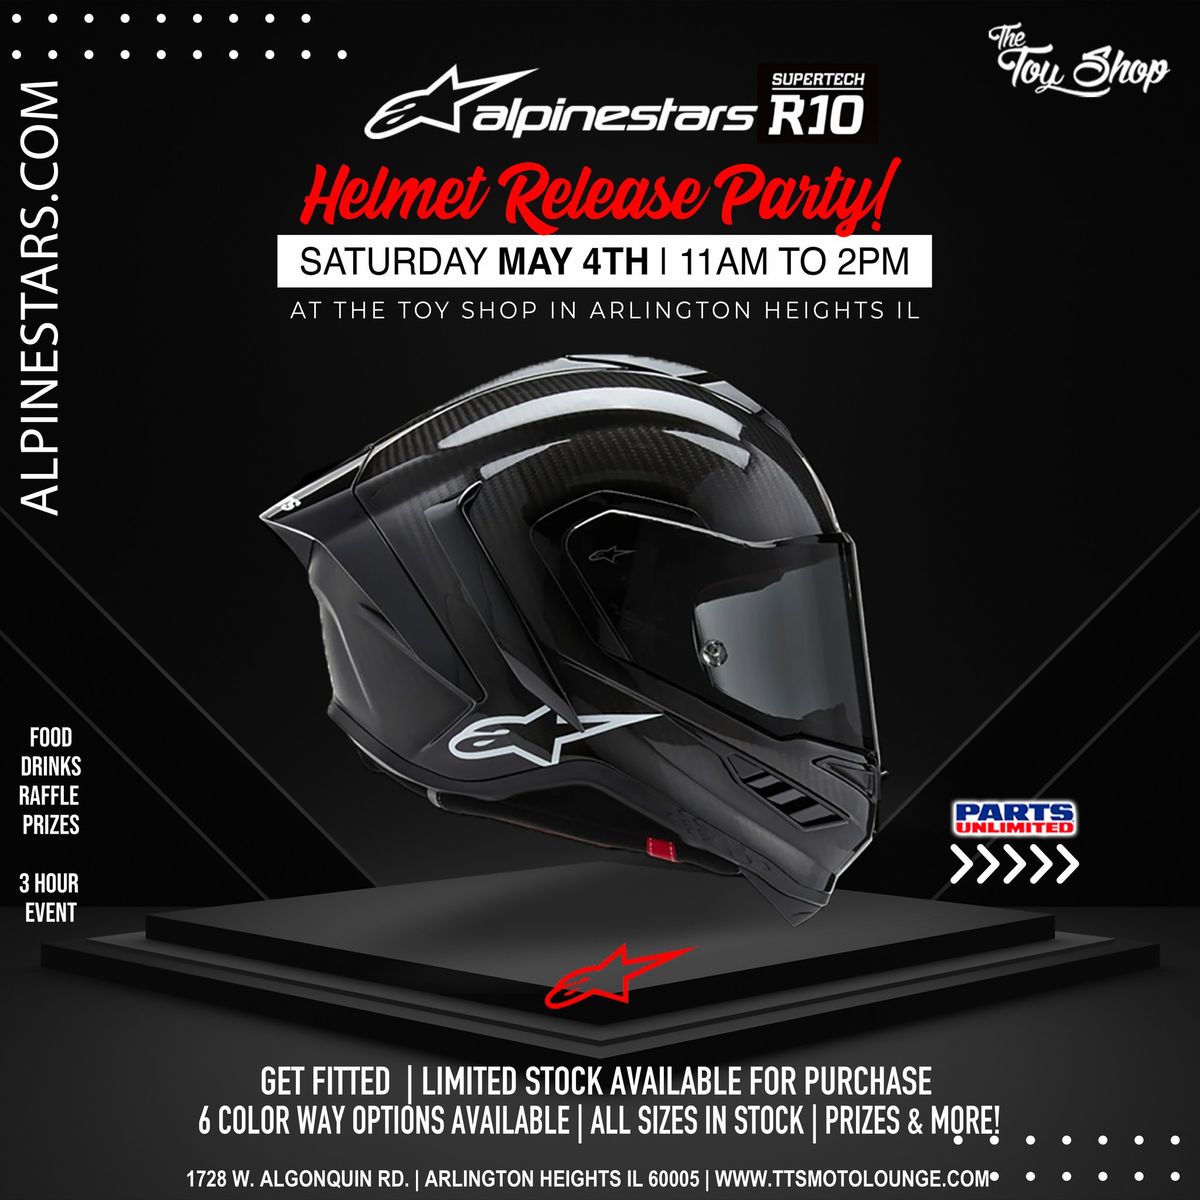 Alpinestars Supertech R10 Helmet Release Party at The Toy Shop May 4th 